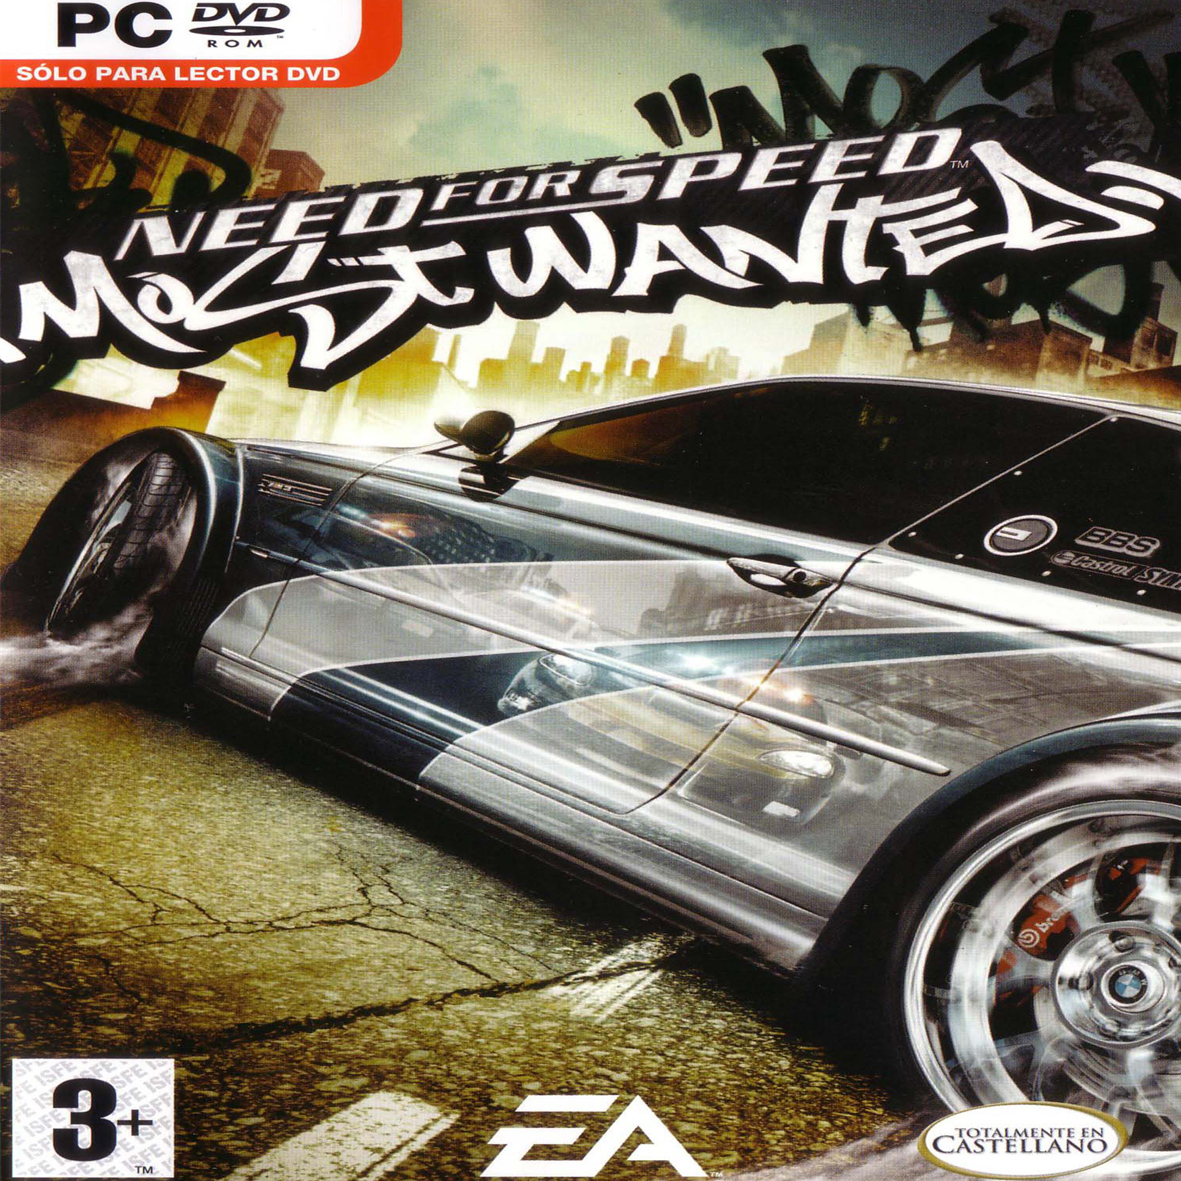 Most wanted прямая ссылка. NFS most wanted 2005 диск. Most wanted 2005 Постер. Постер нфс мост вантед 2005. NFS most wanted 2005 обложка.